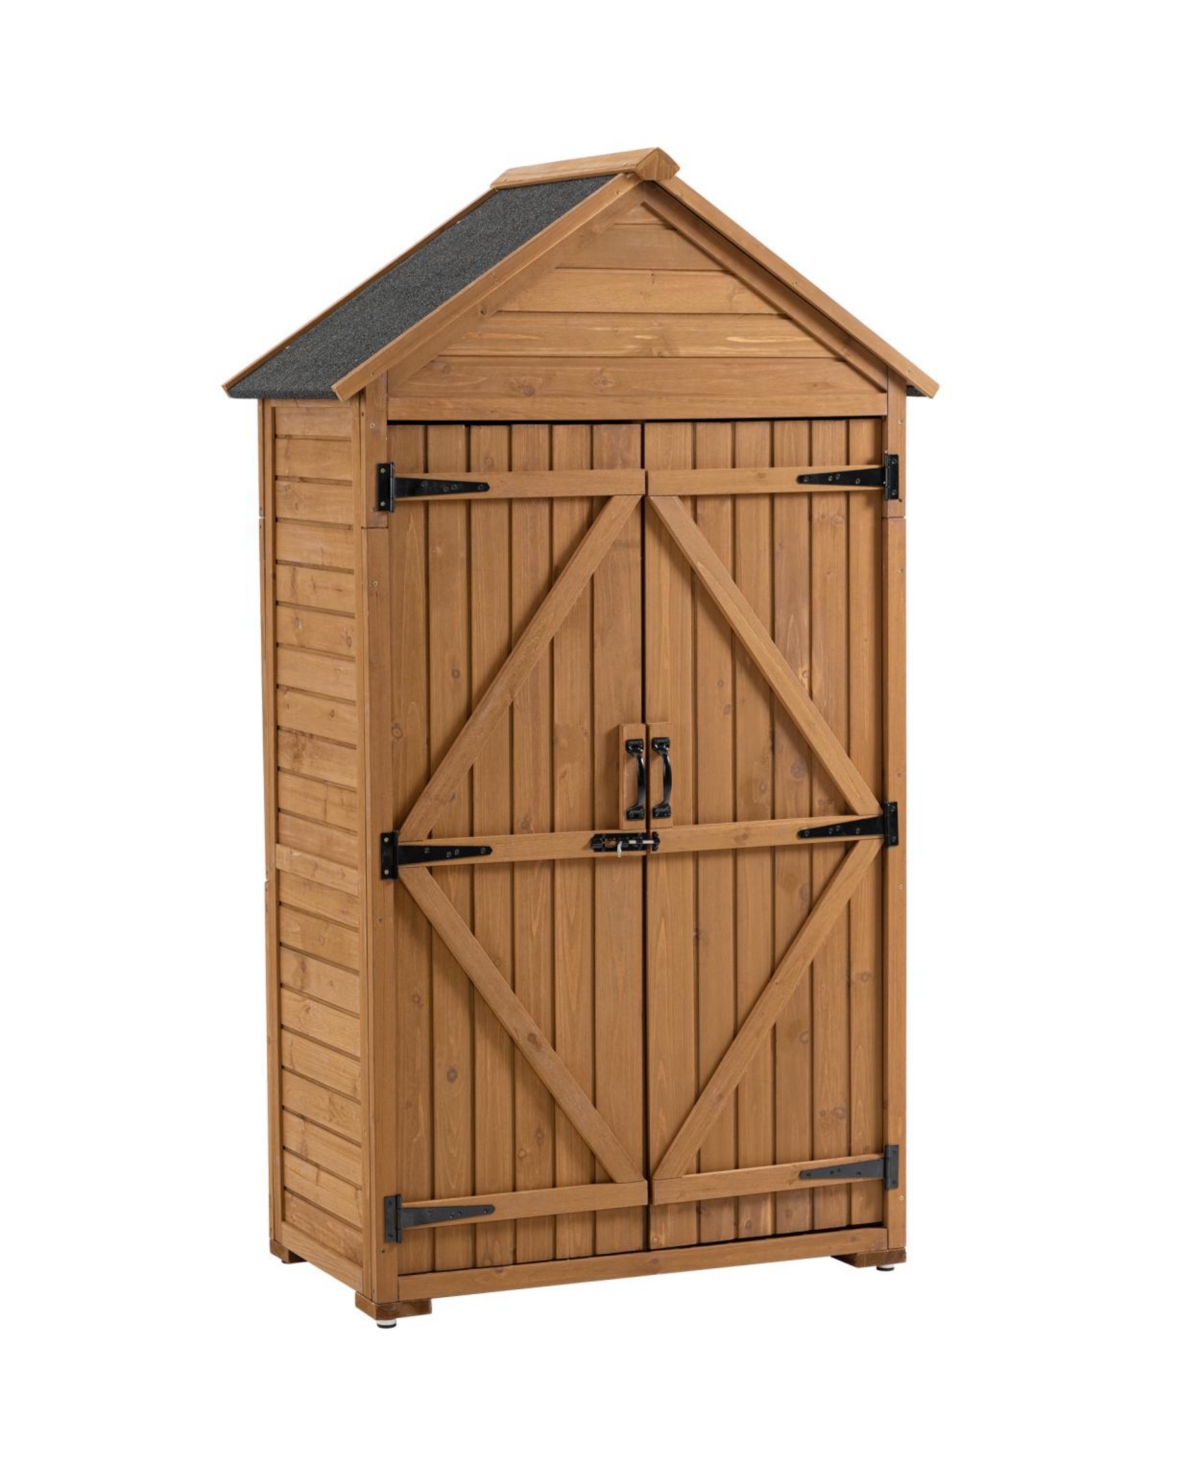 Wooden Outdoor Storage Cabinet with Shelves and Latch - Brown